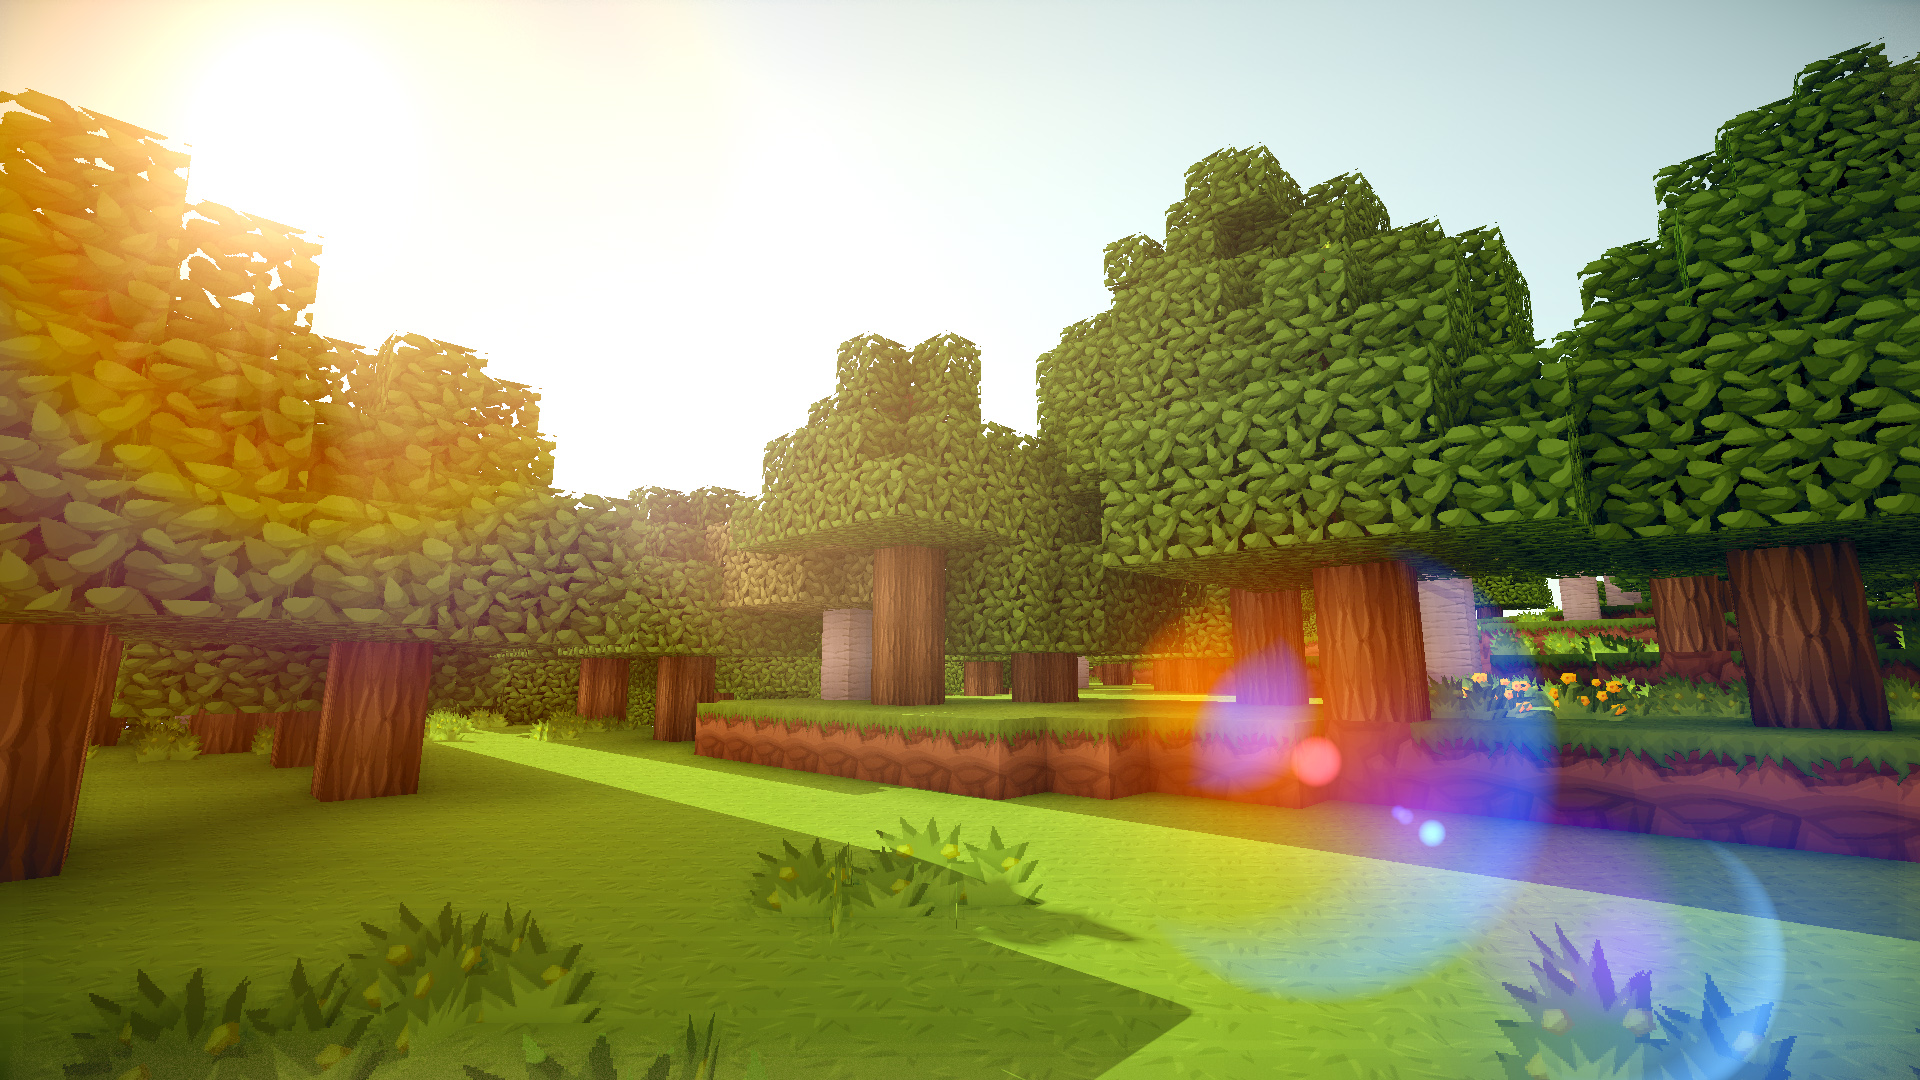 339 Minecraft HD Wallpapers | Backgrounds - Wallpaper Abyss - Page 2